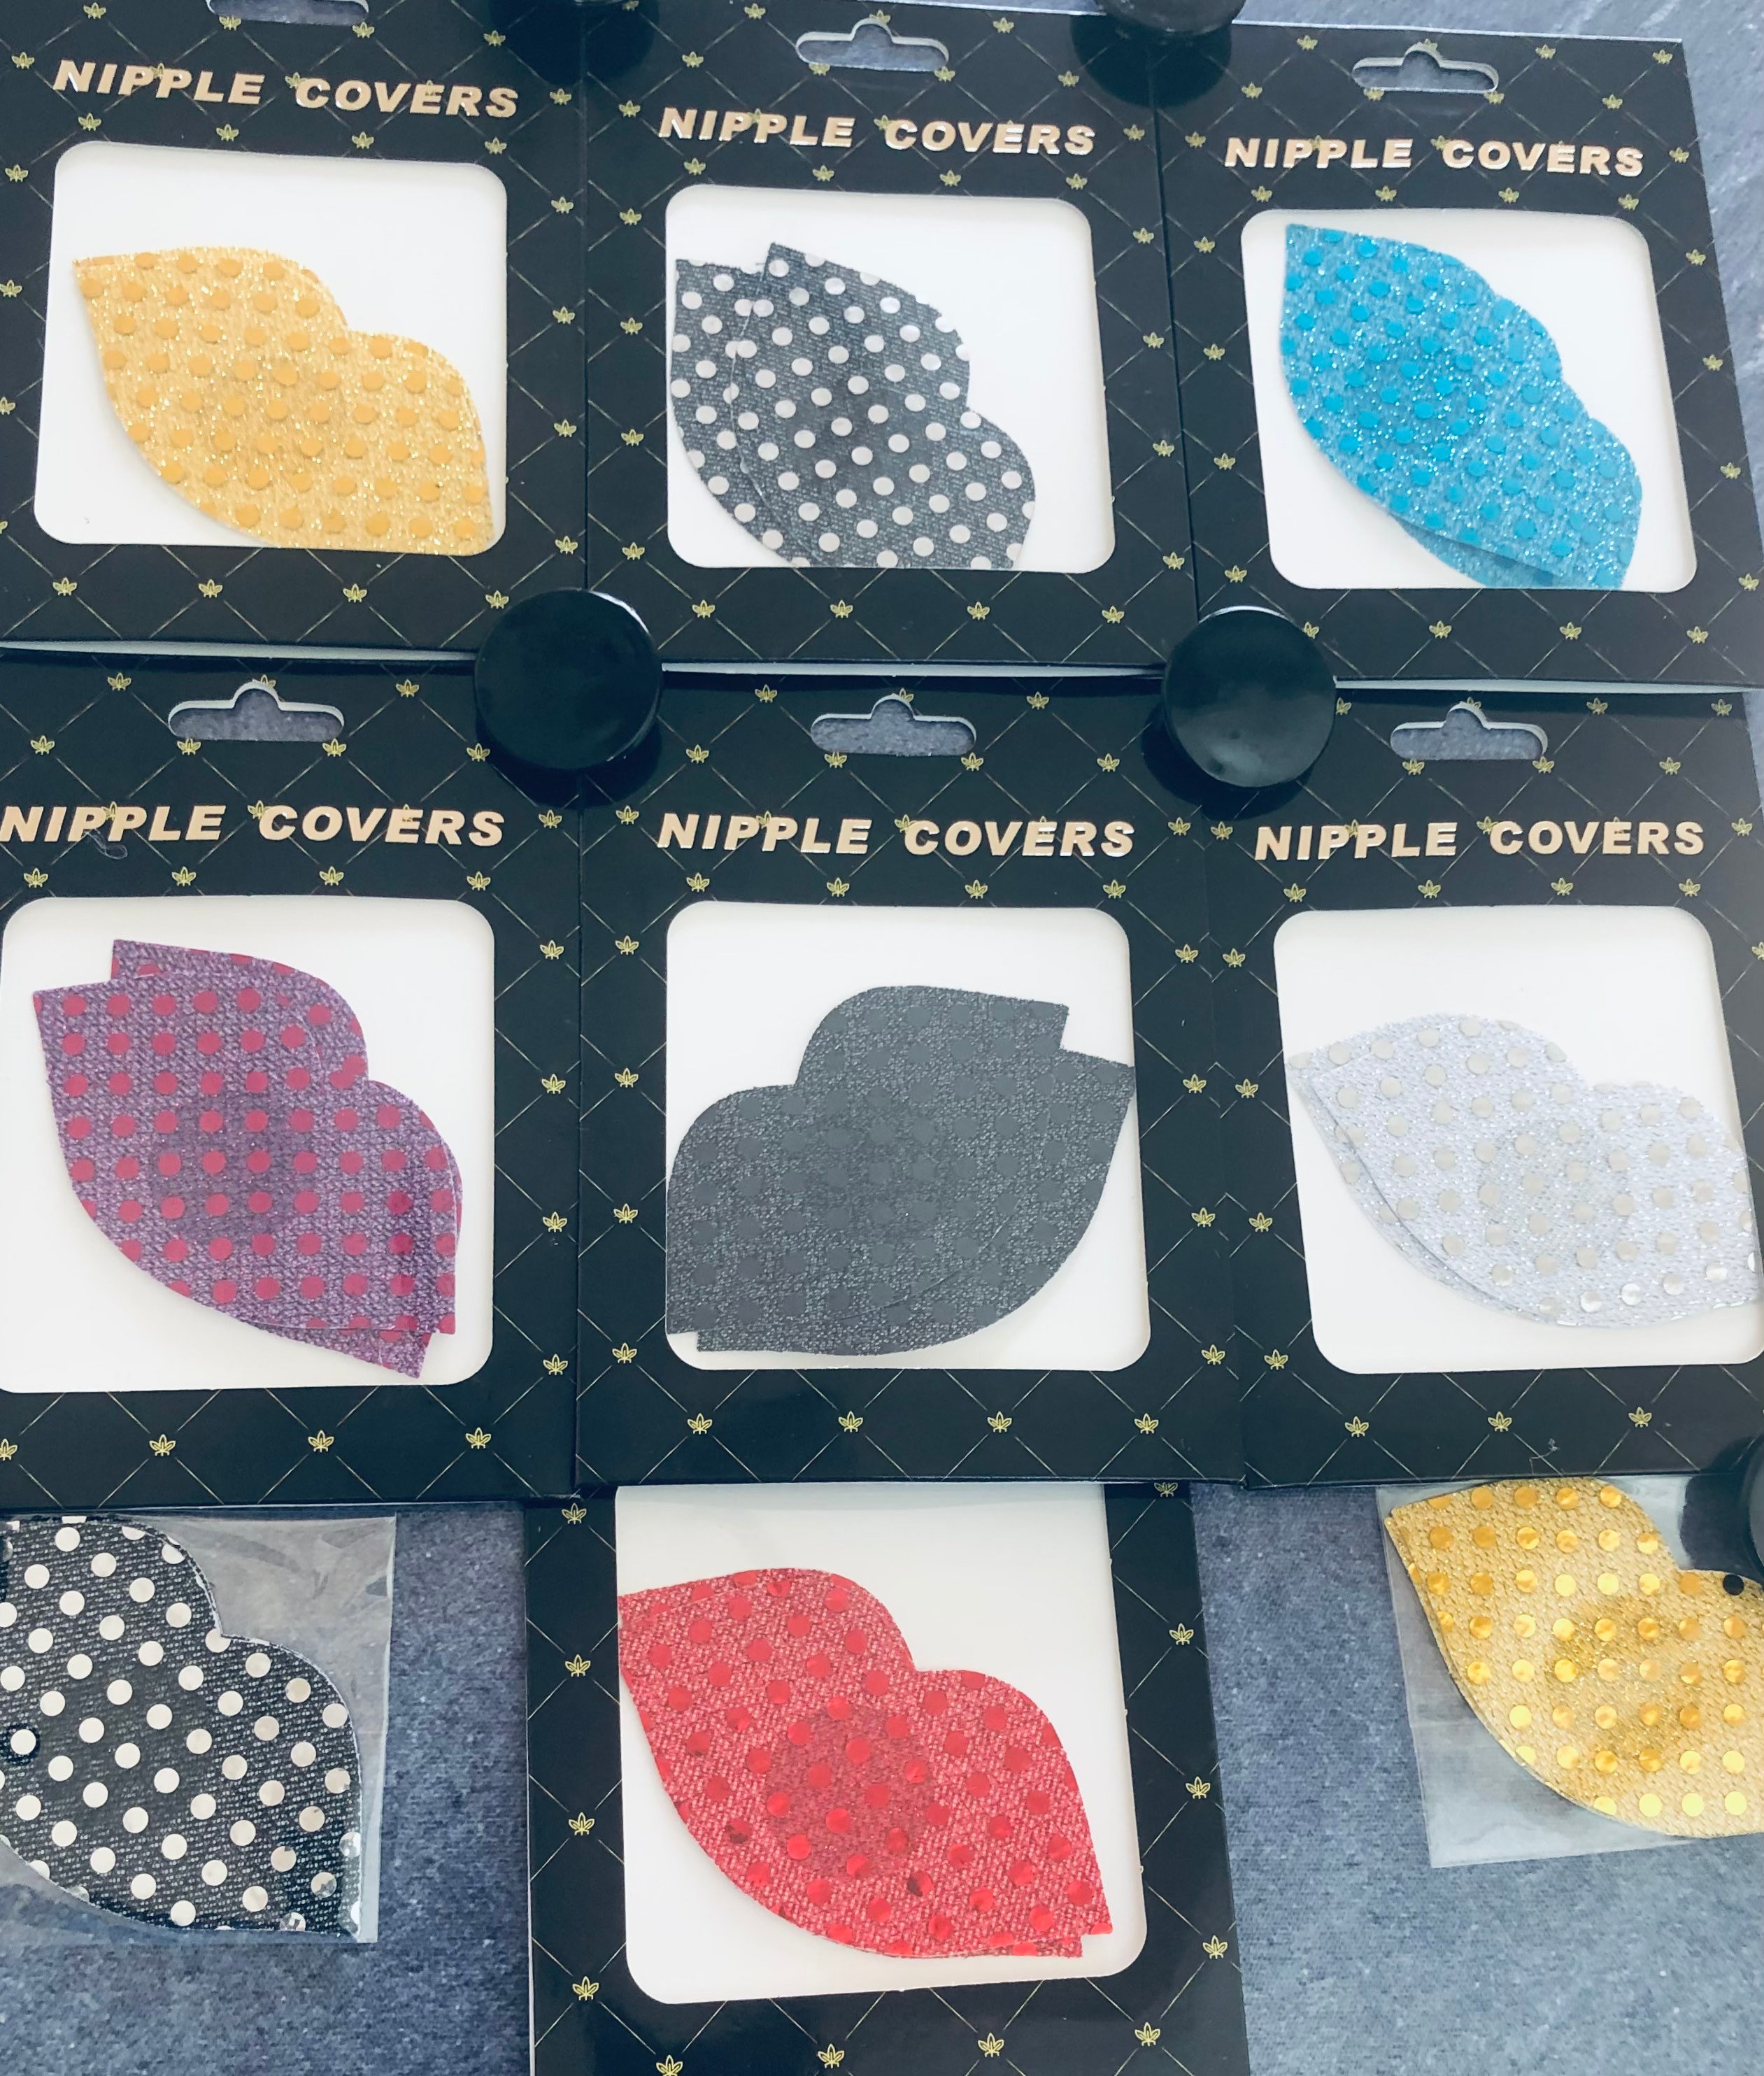 Sexy lips nipple covers designed by Roger Rich 7 hot colors choose 2 pasties  bundled glittery